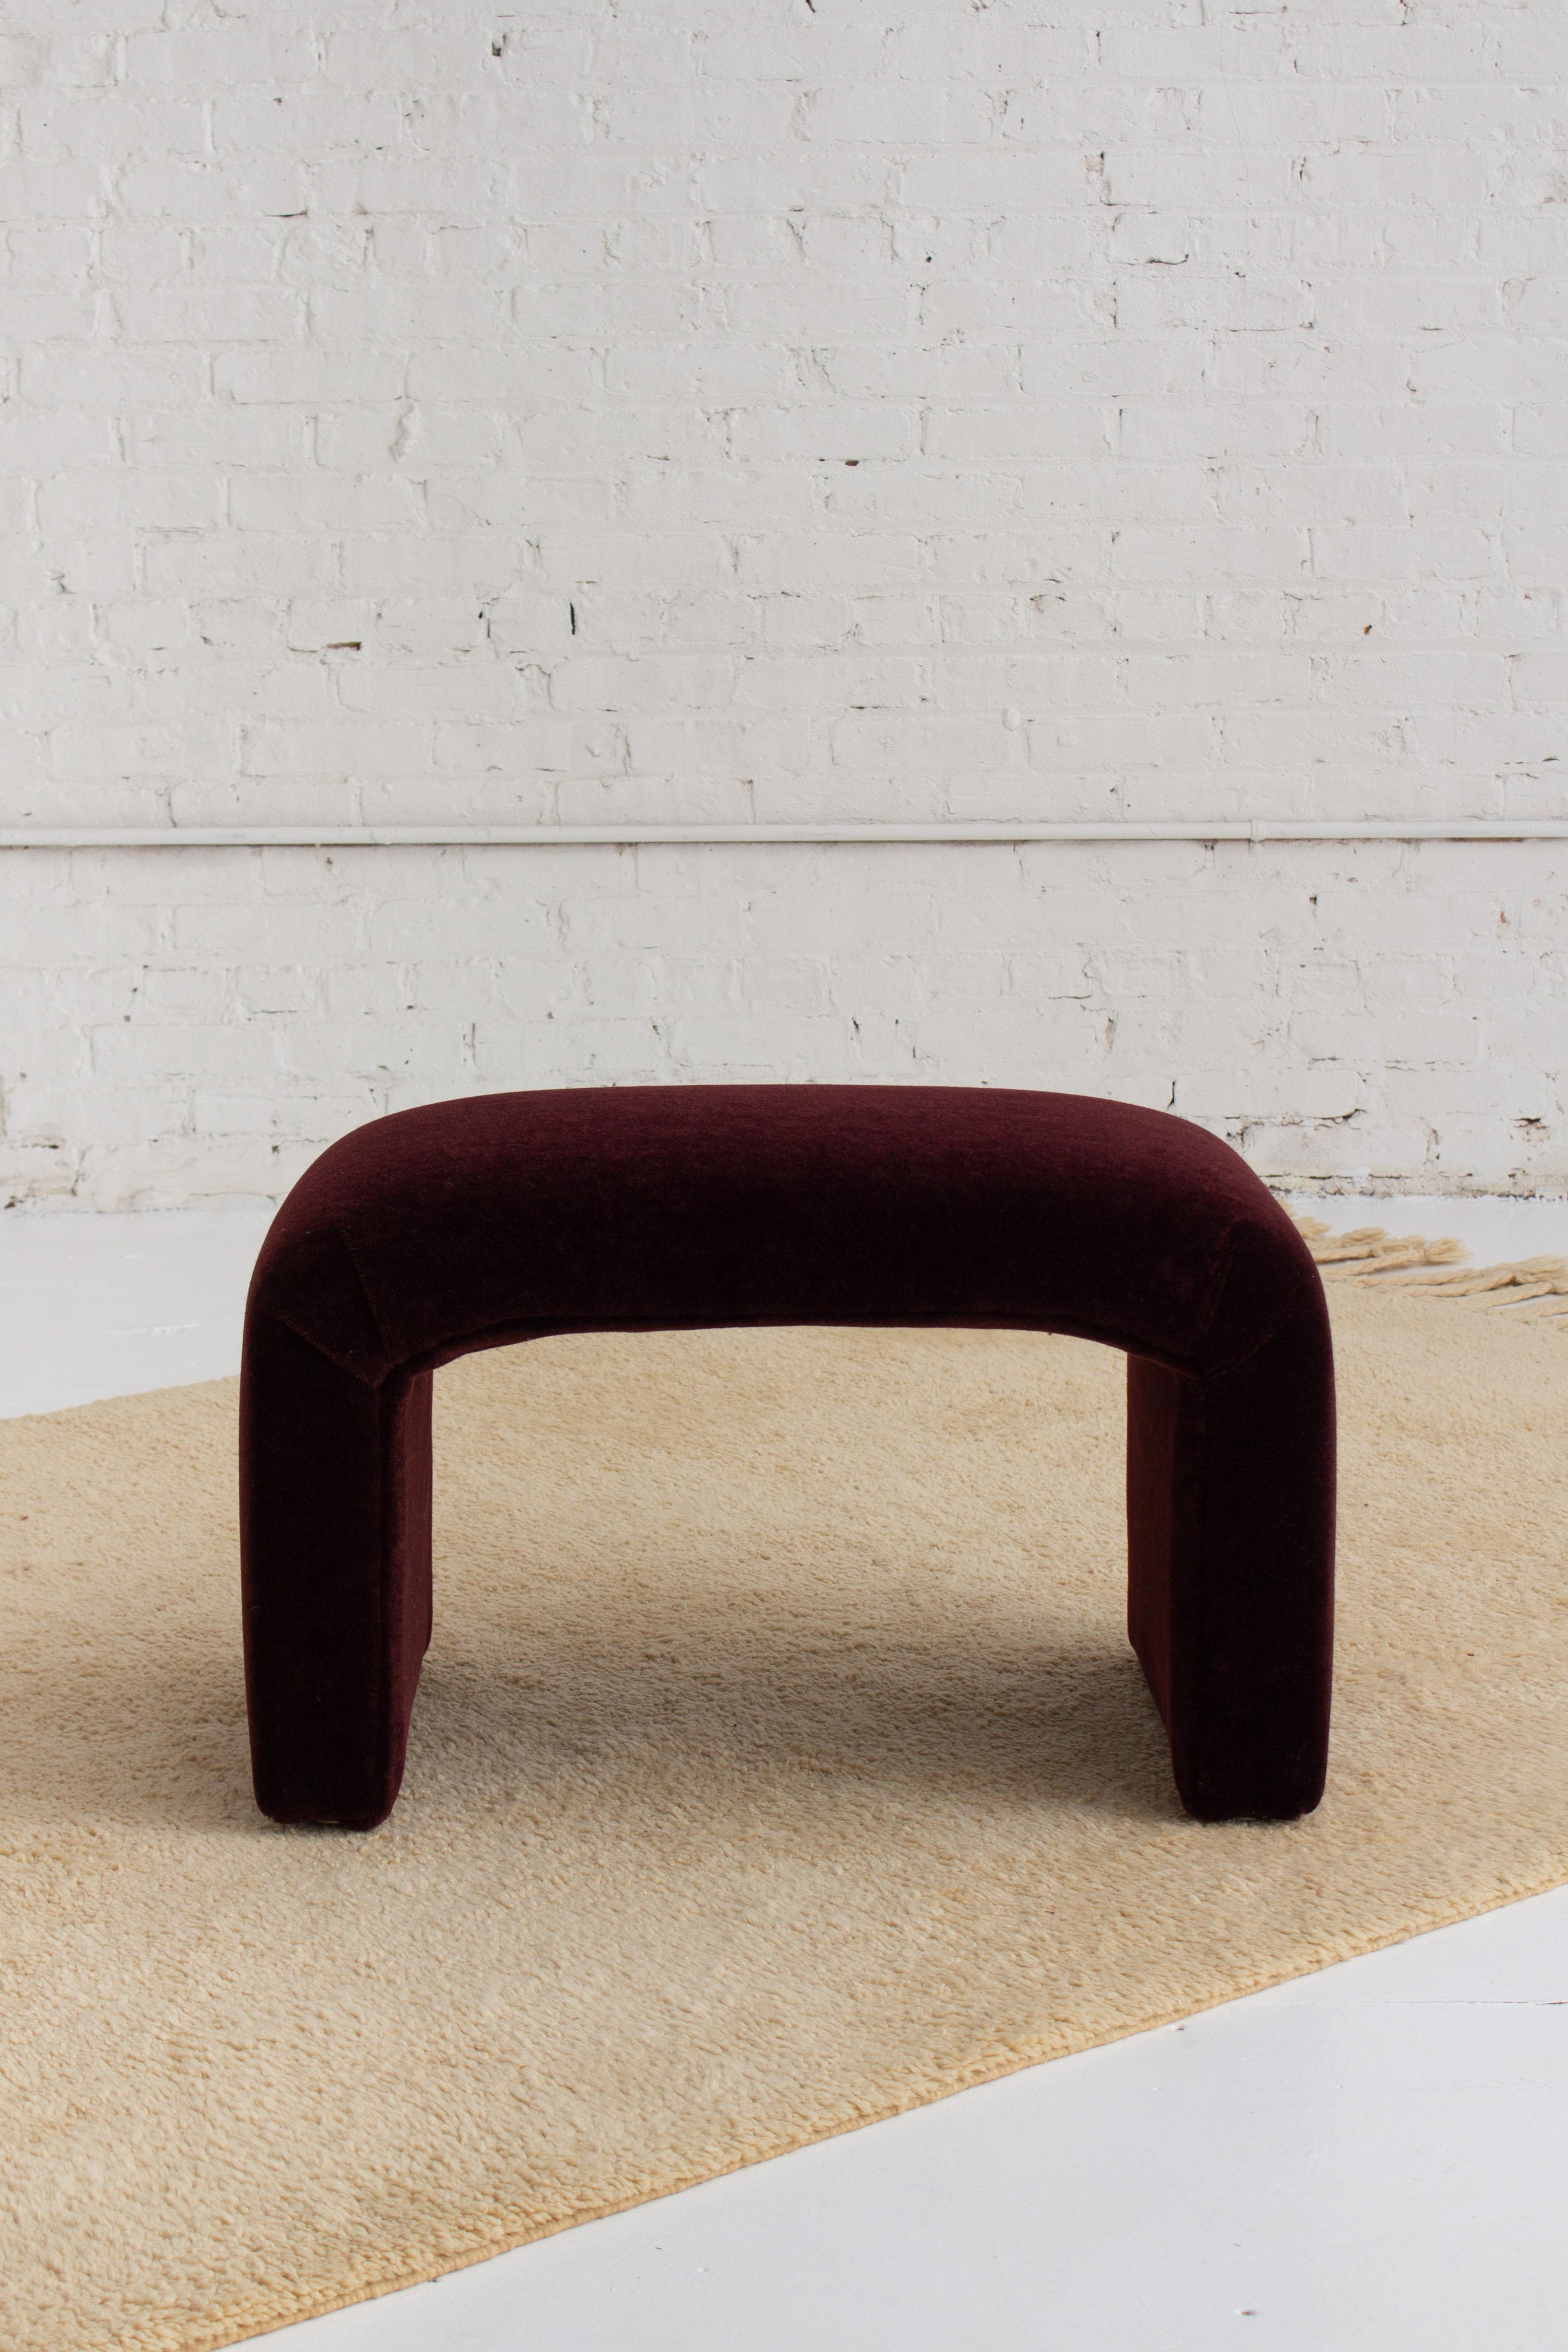 North American Waterfall Bench in Crimson Mohair